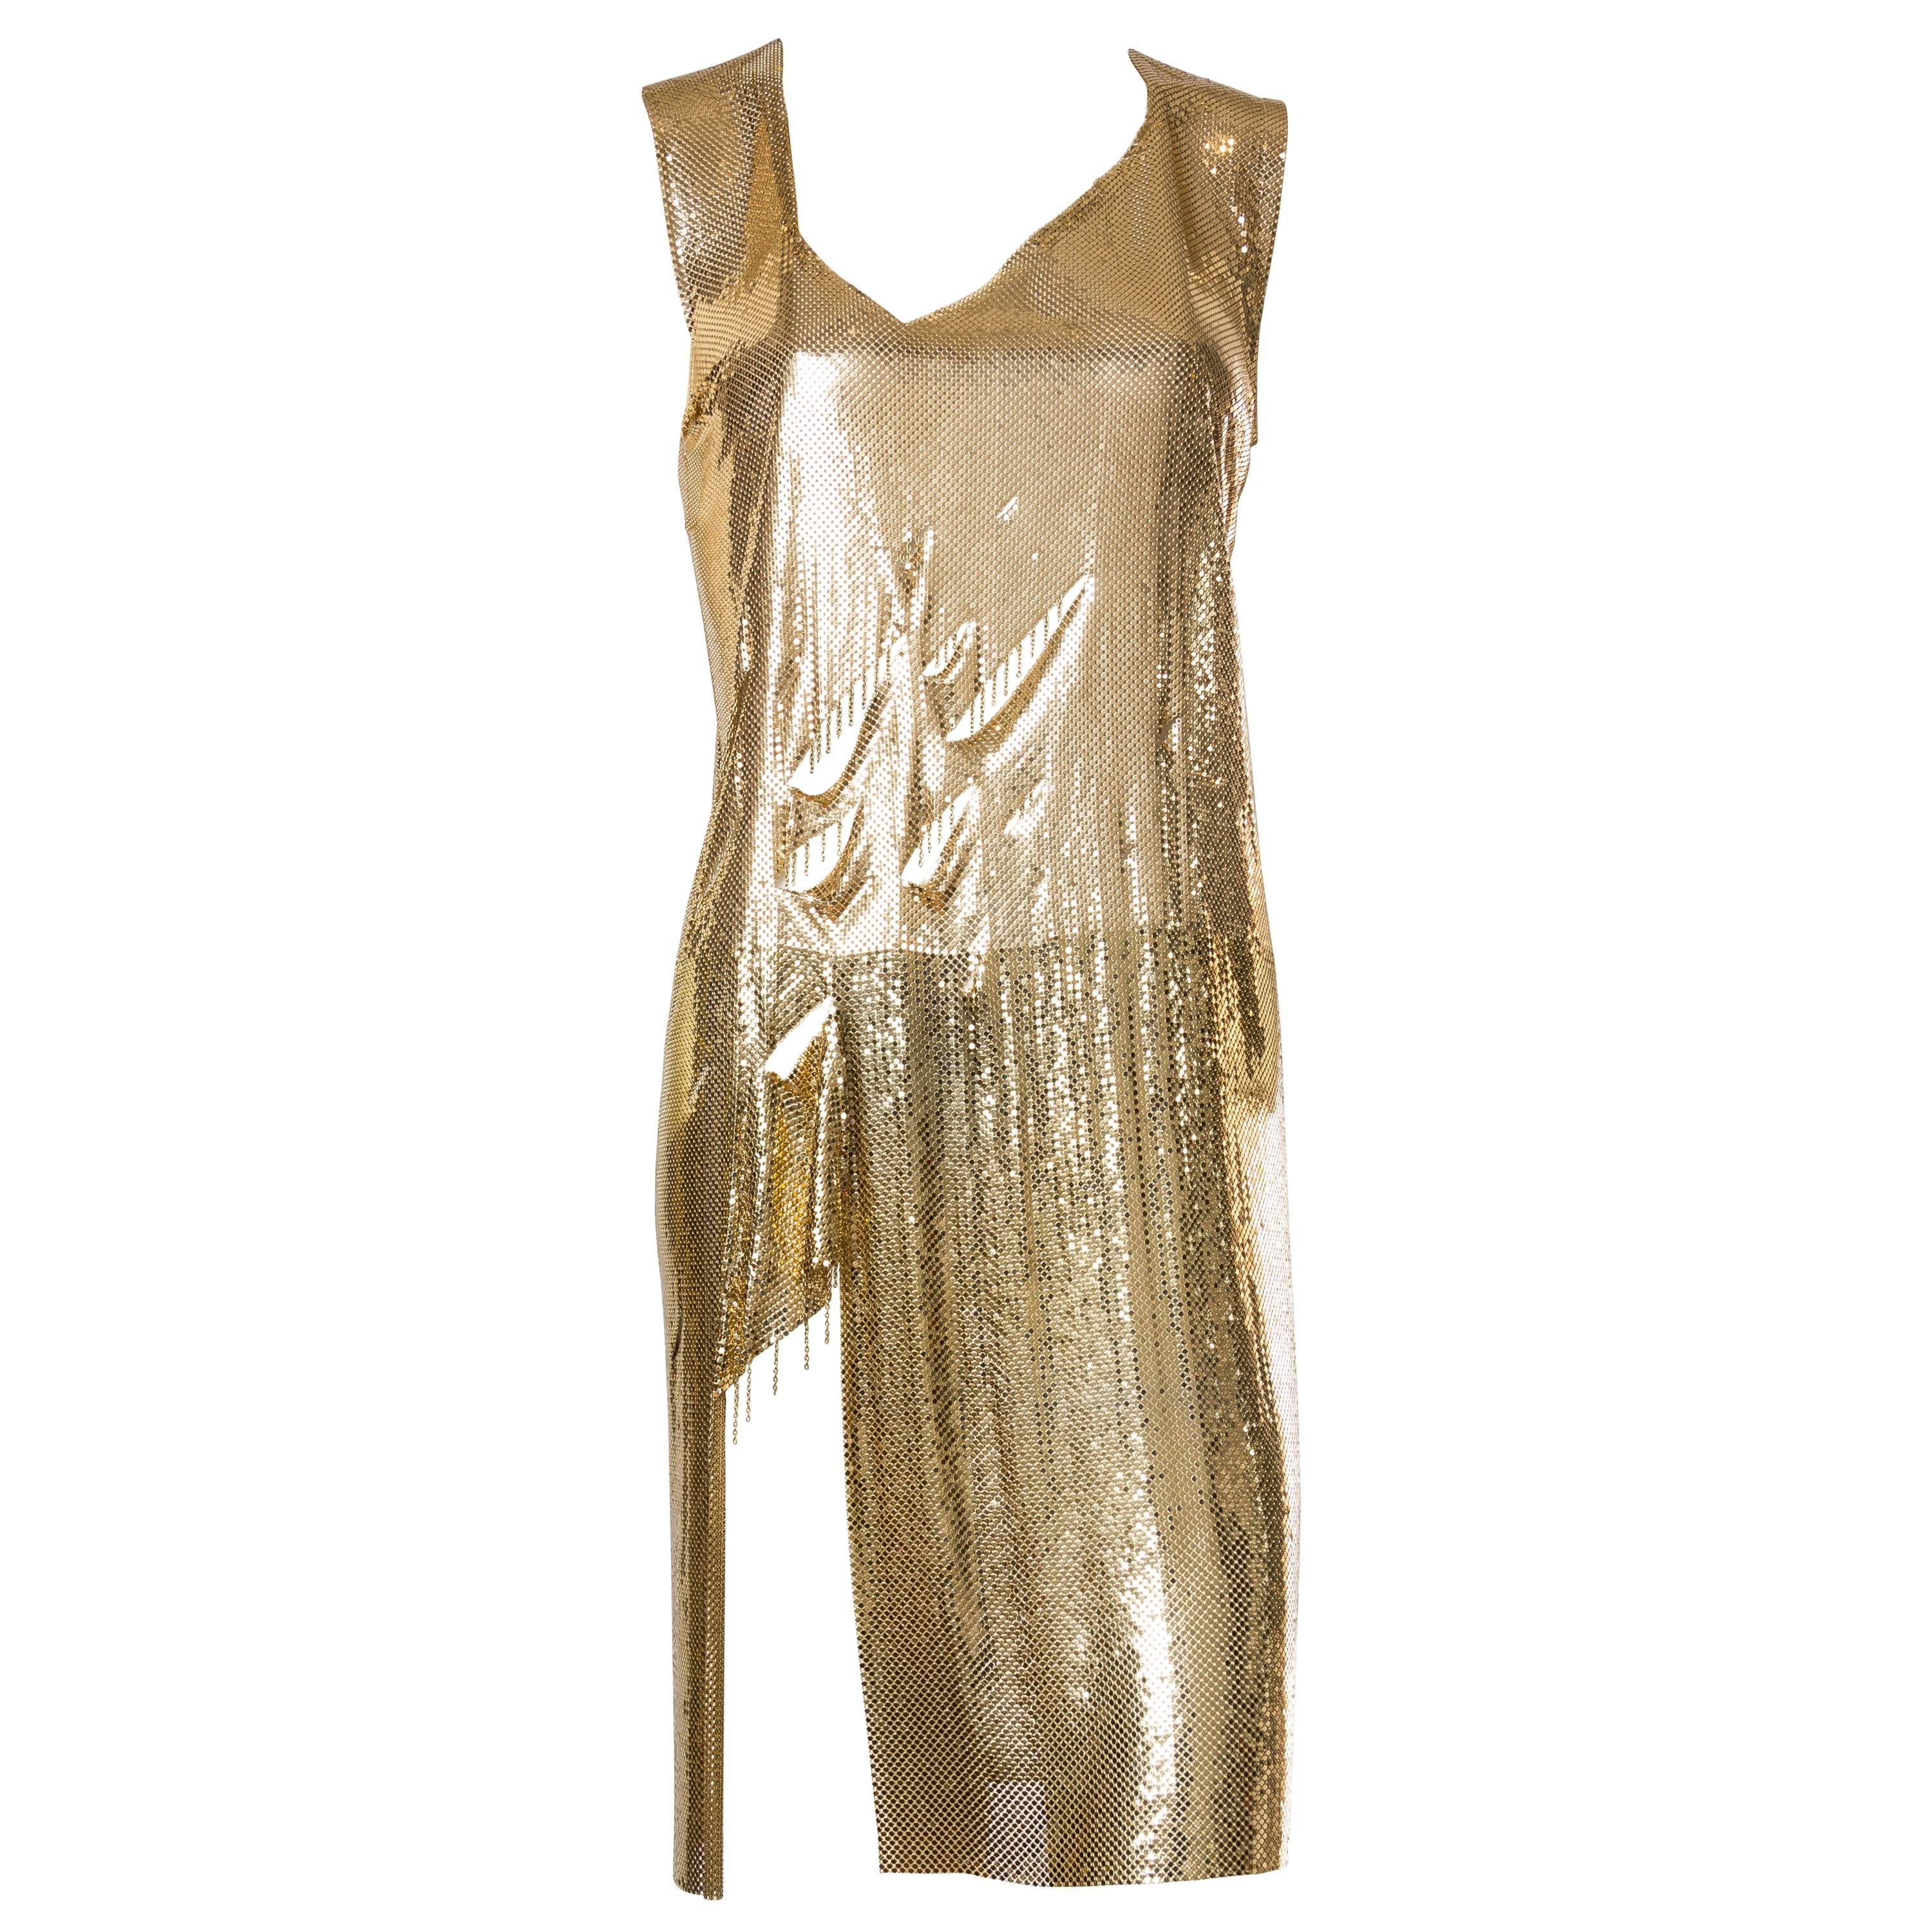 1980 MORPHEW COLLECTION Style Metal Mesh Rock And Roll In Solid Gold Slashed